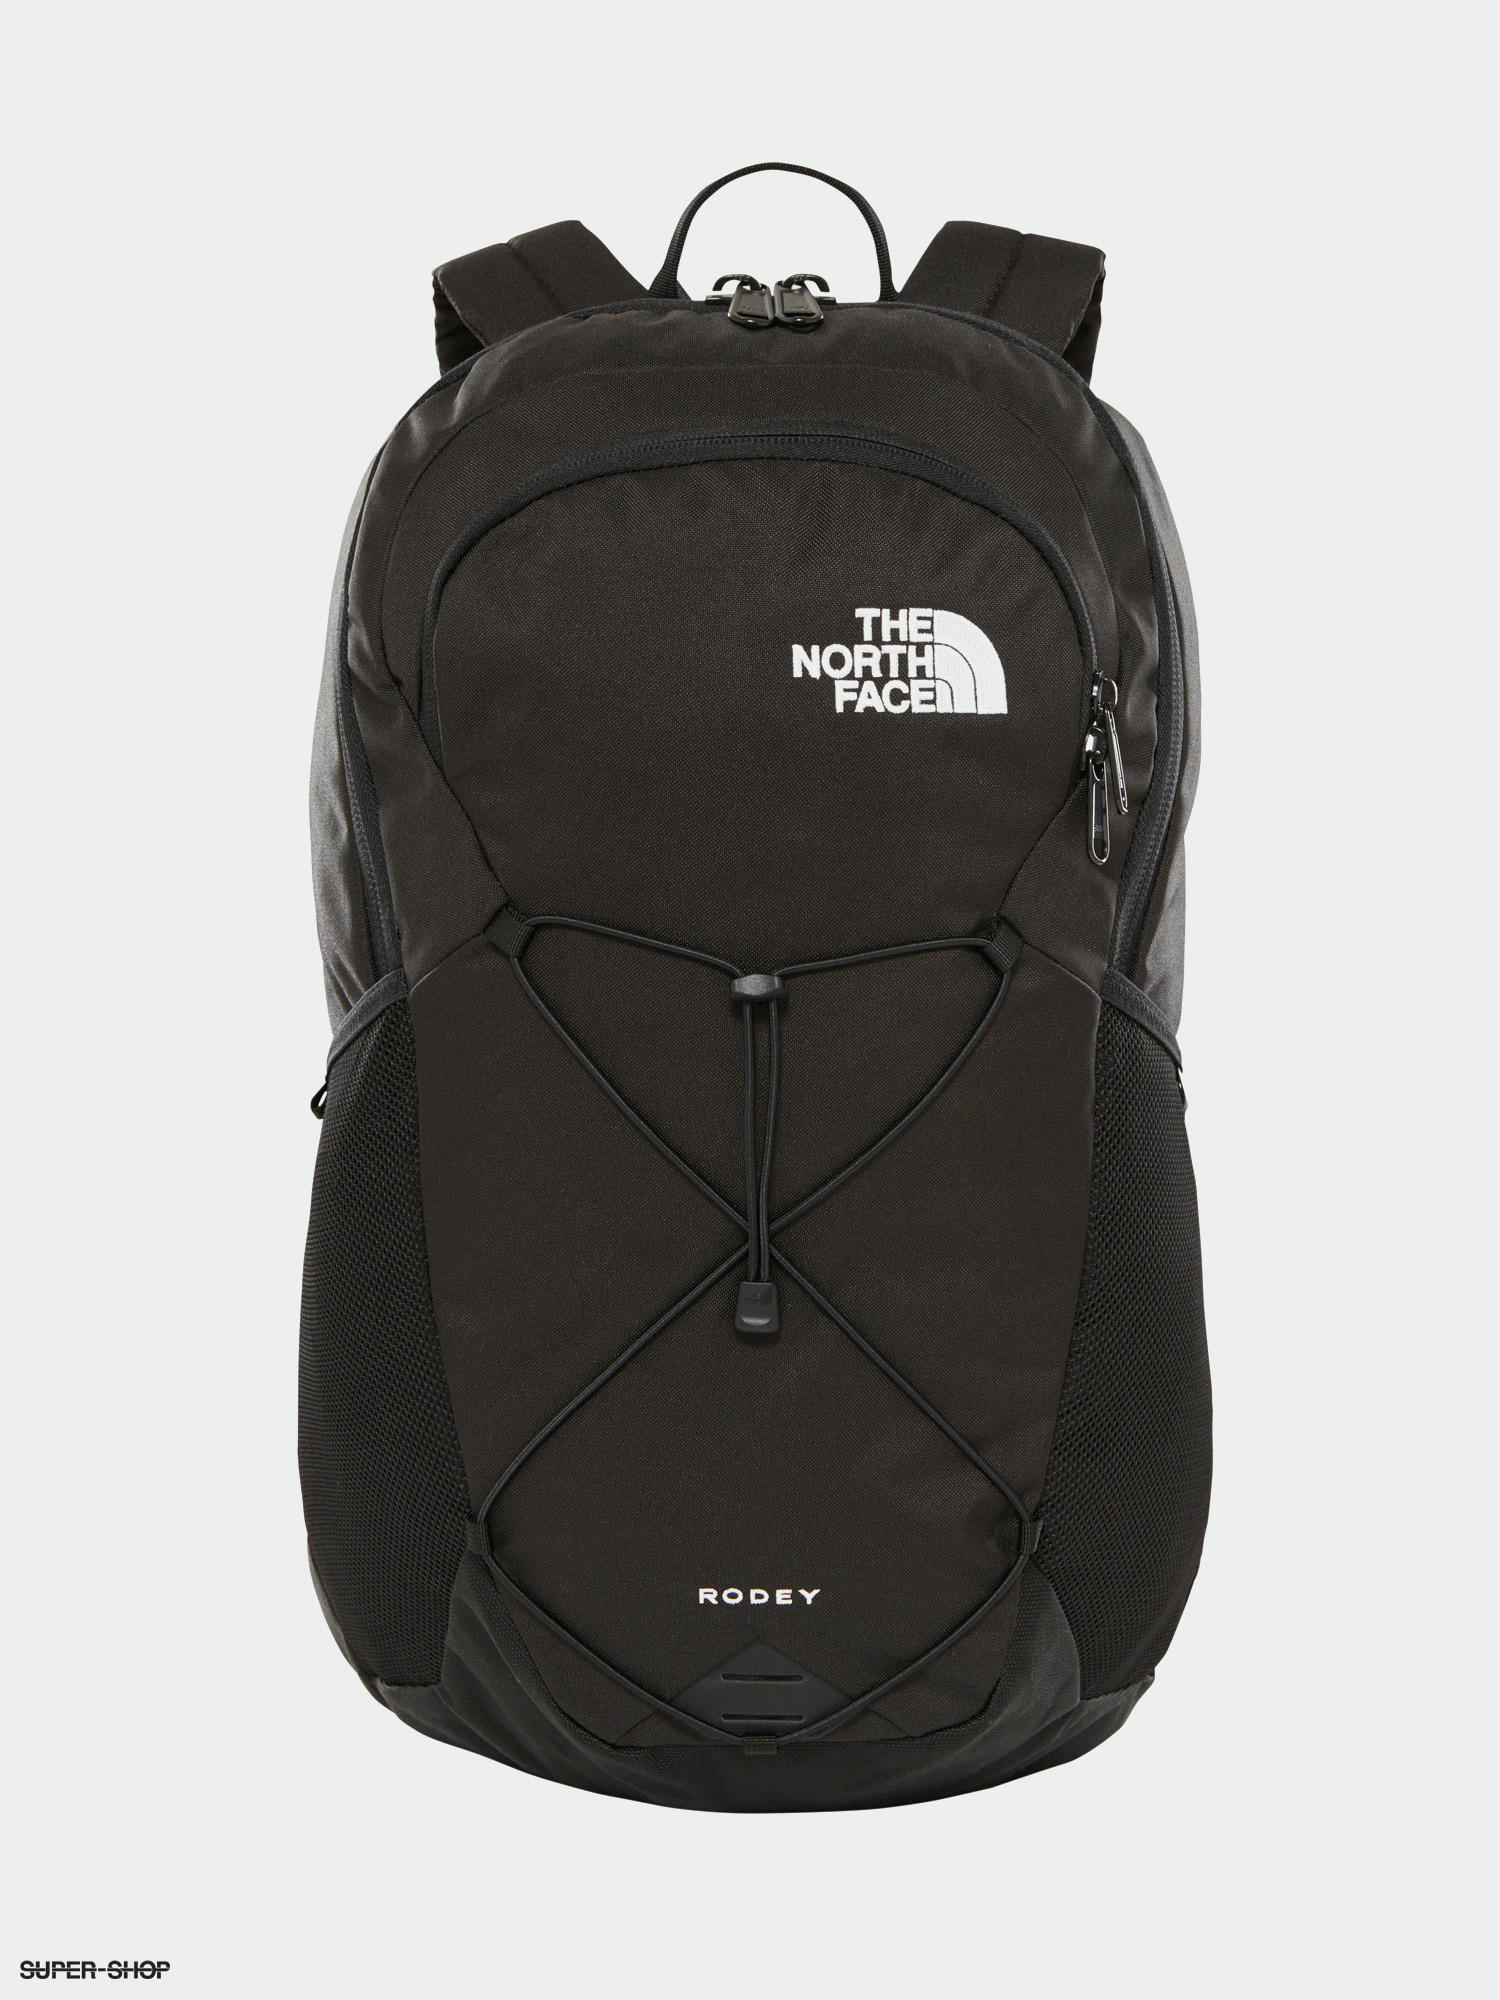 The North Face Rodey Backpack (tnf black)